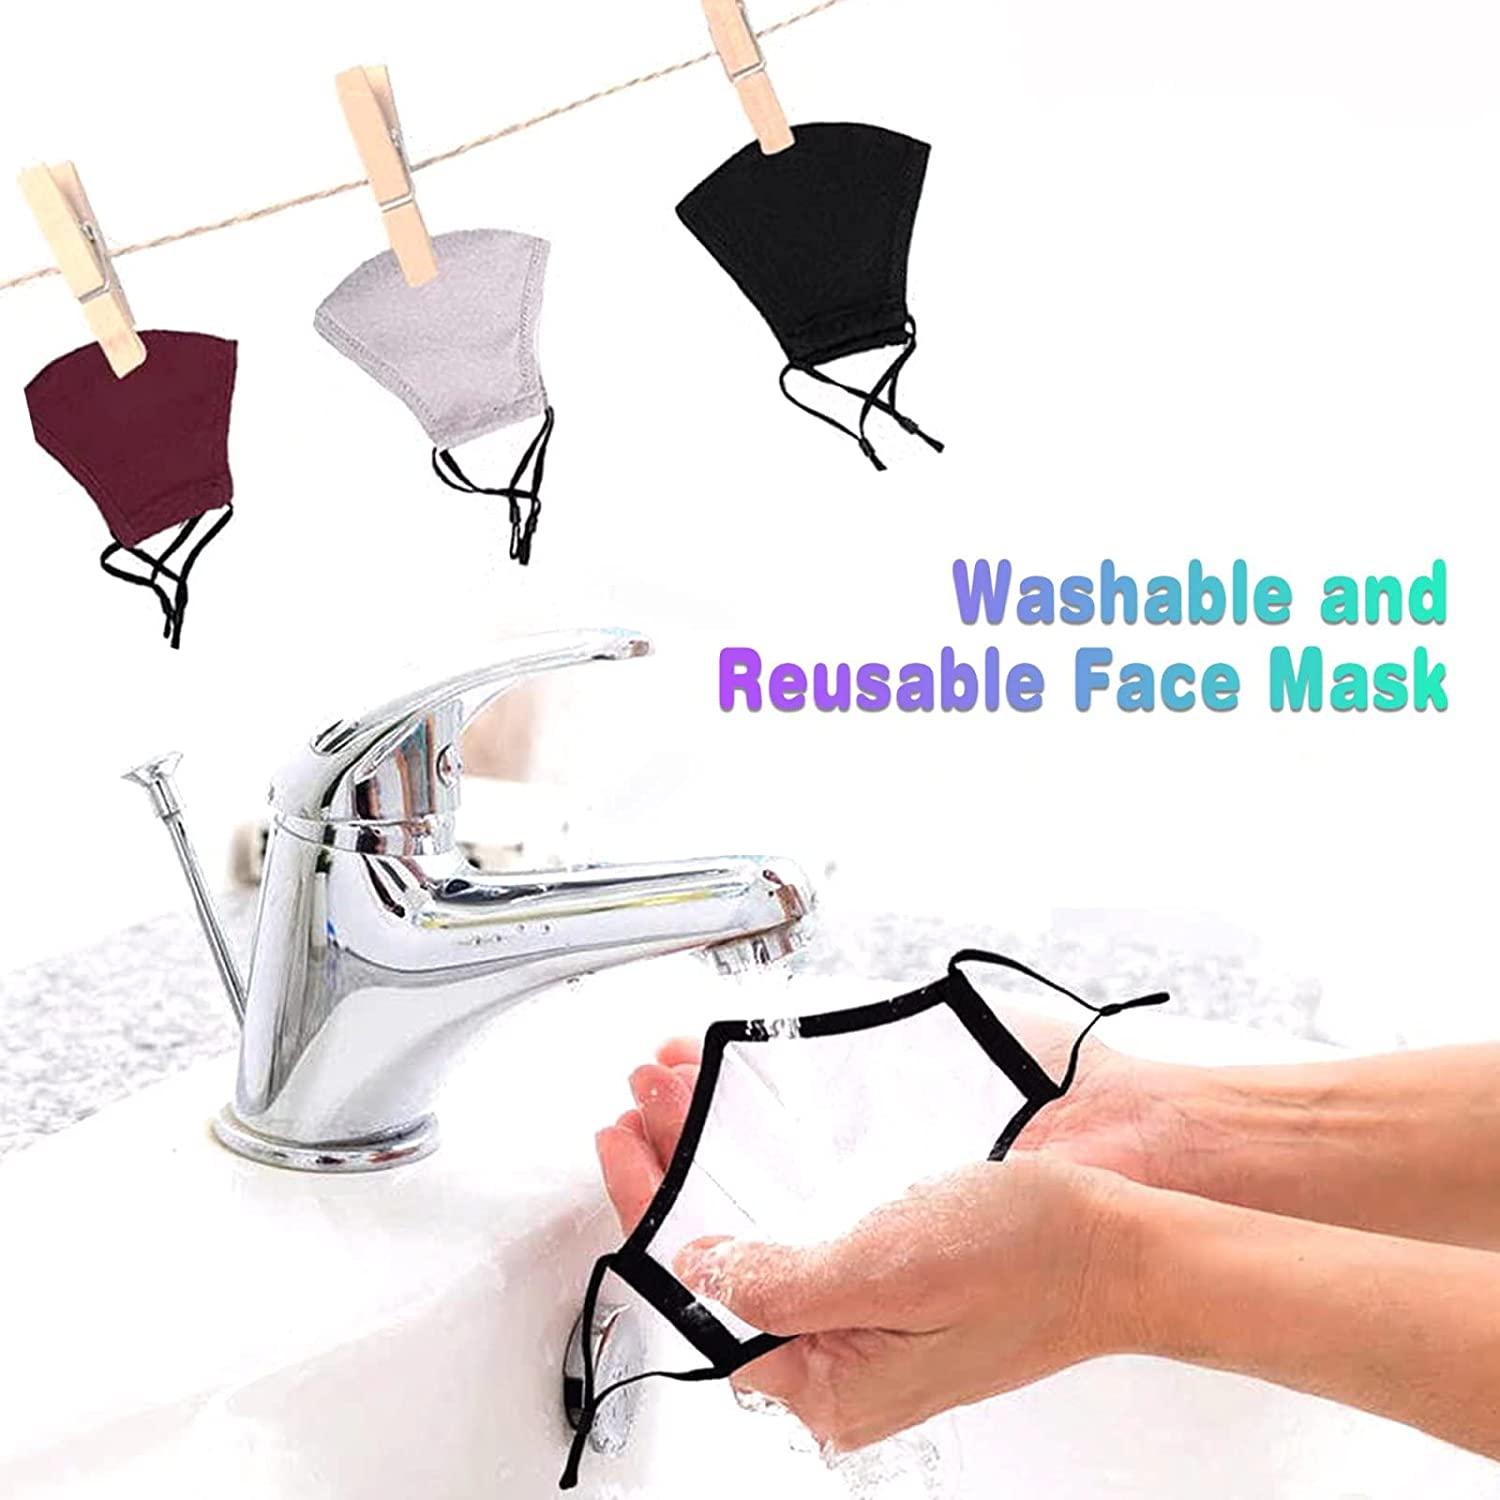  Kids Face Mask Chad Flag Washable Adjustable Reusable Cloth Face  Mask for Children 2 Pack With Filter : Clothing, Shoes & Jewelry